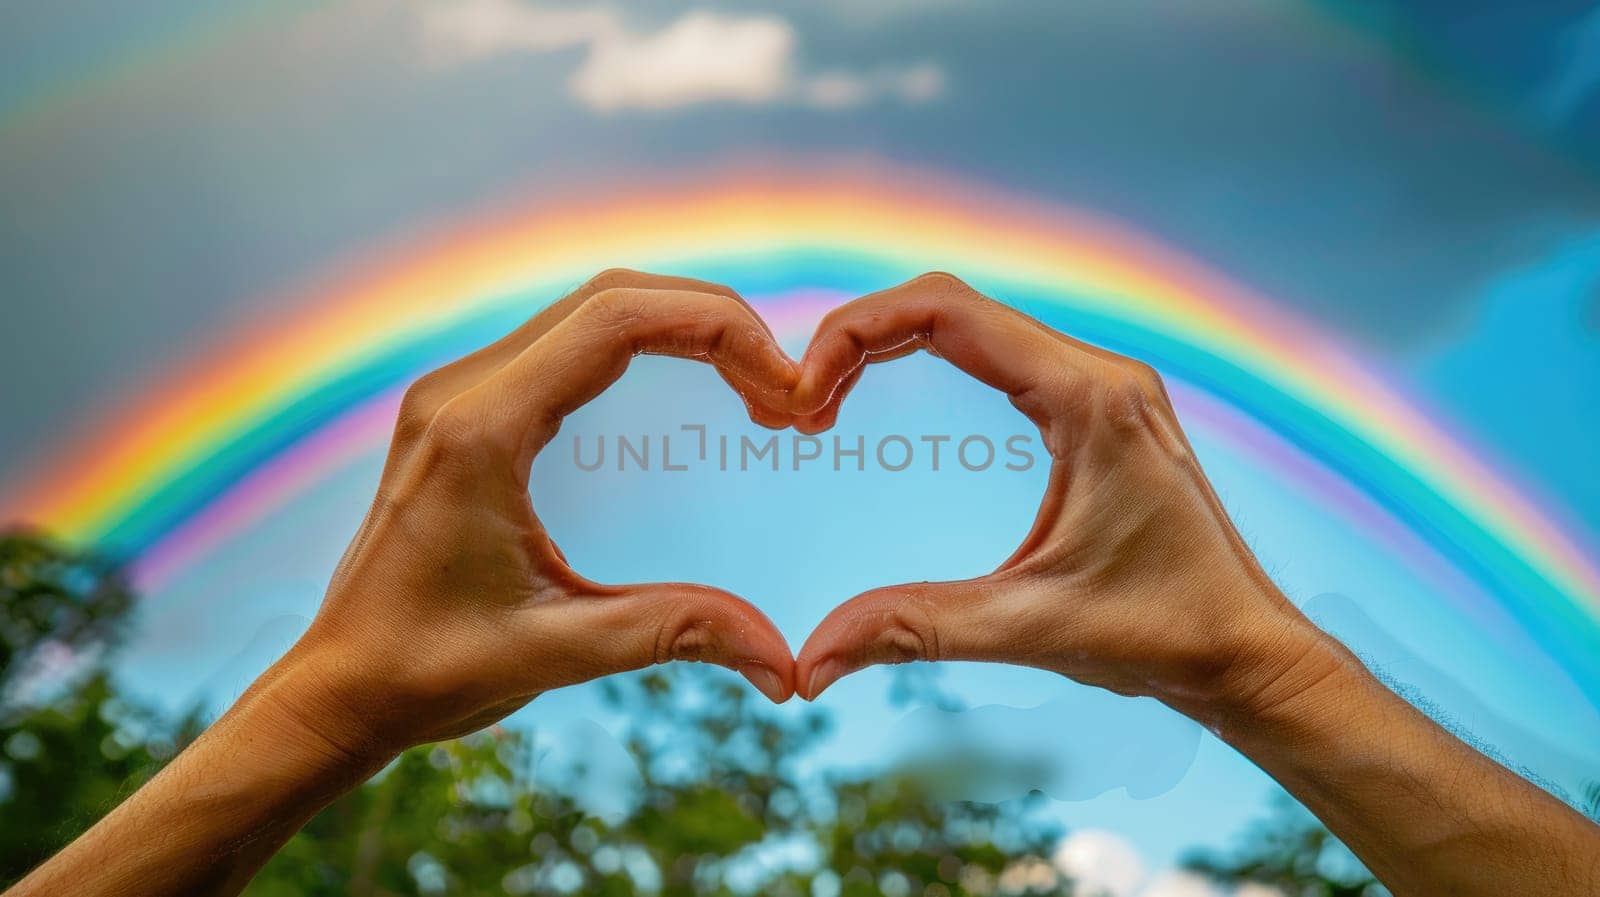 A close-up of two hands forming a heart shape, with a rainbow in the background, highlighting the themes of pride and love.